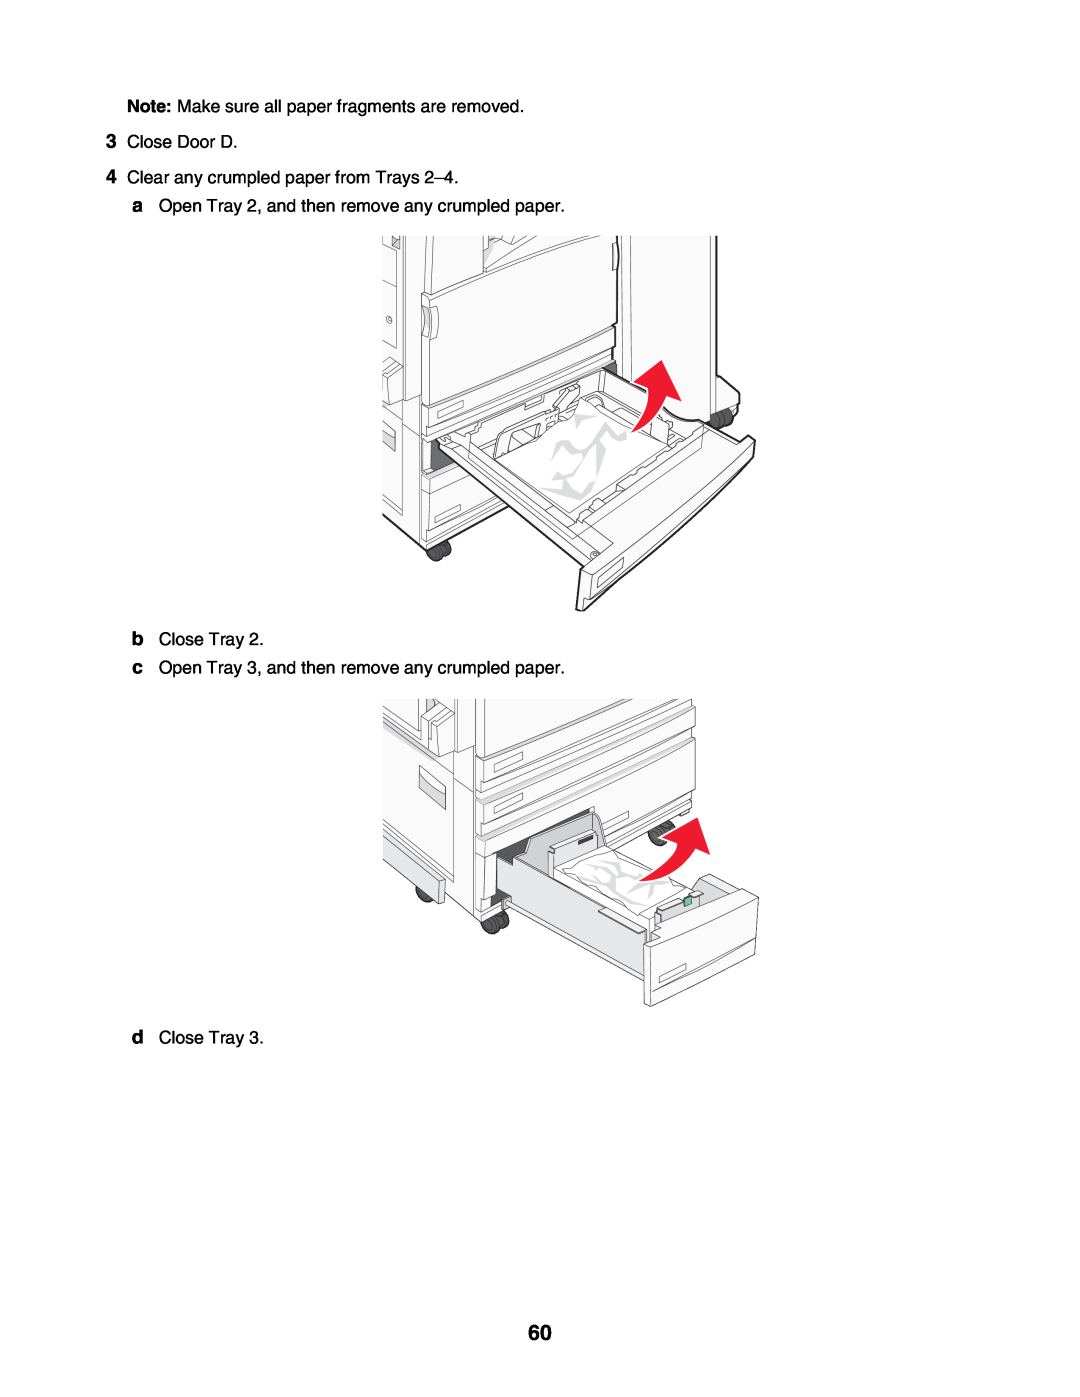 Lexmark C935 manual Note Make sure all paper fragments are removed 3 Close Door D, Clear any crumpled paper from Trays 